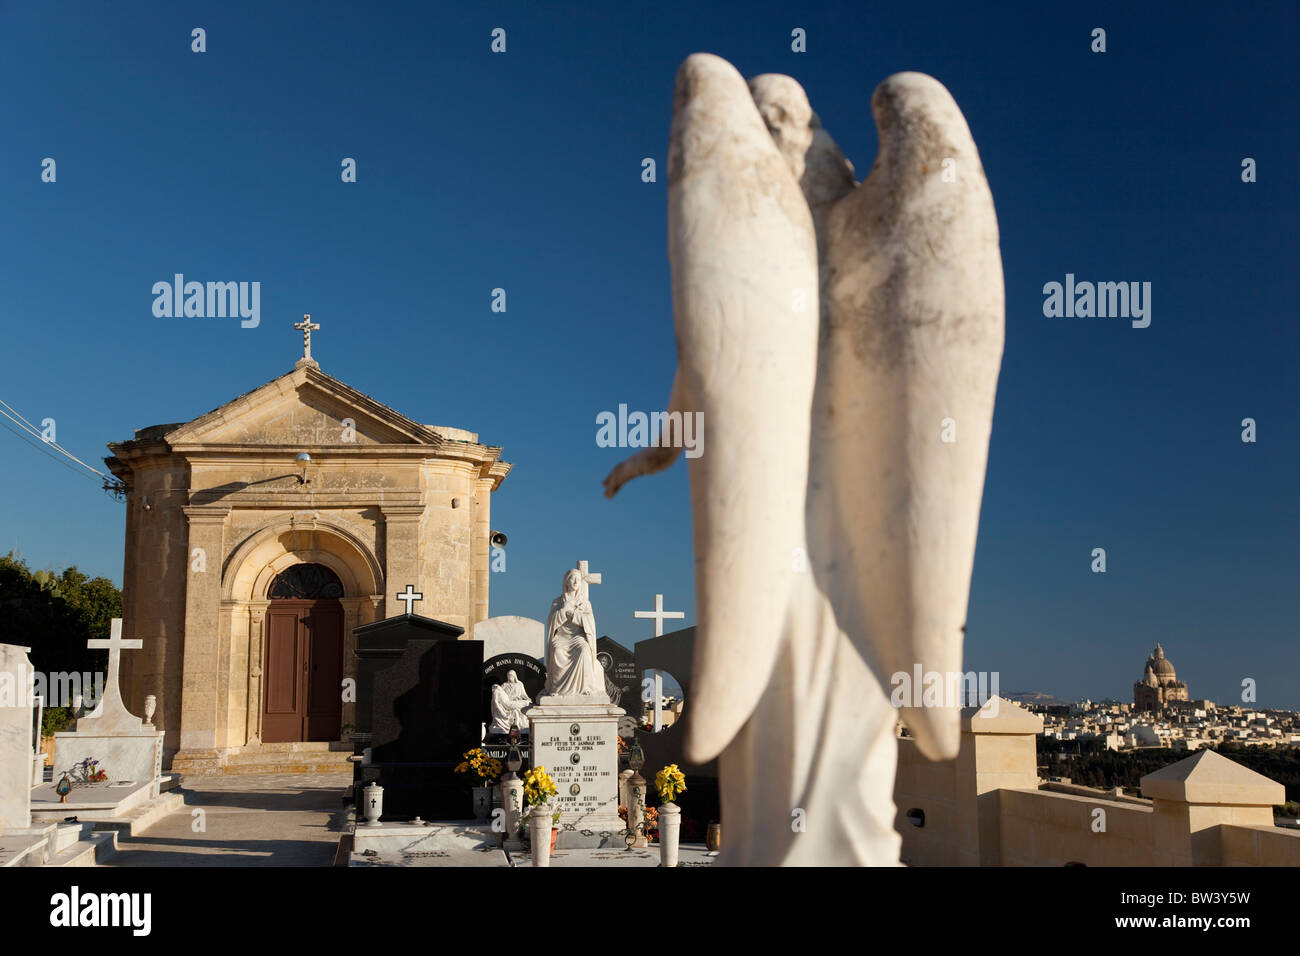 Restrained stone chapels contrast with the ornate baroque tombstones adorn graves in cemeteries in the Maltese Islands. Stock Photo